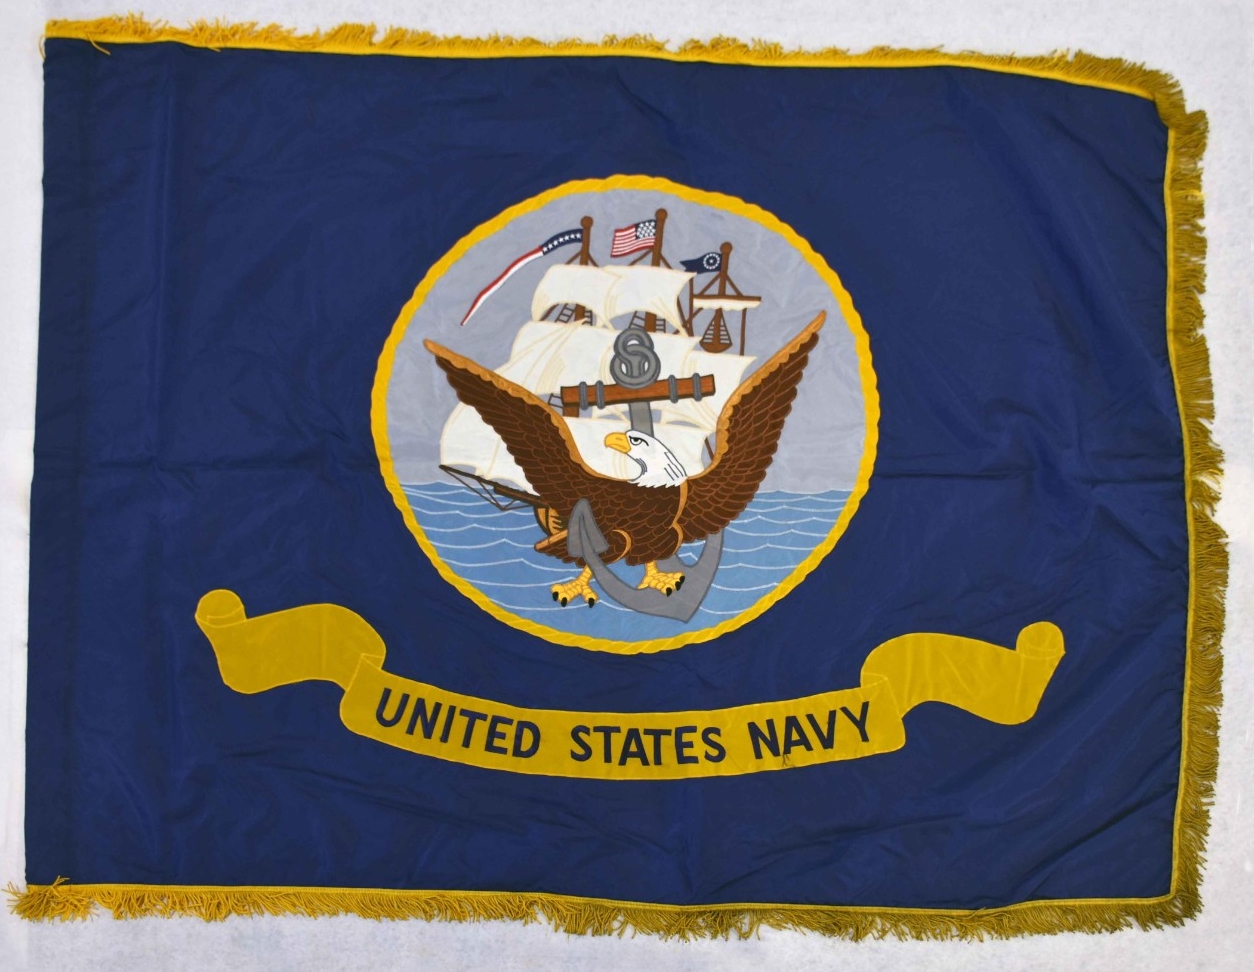 One US Navy flag. The flag is rectangular-shaped blue nylon edged with gold fringe. At the center of the flag is the seal of the US Navy with the eagle, anchor, and sailing ship above a banner with the words “United States Navy.” There are smoke ...